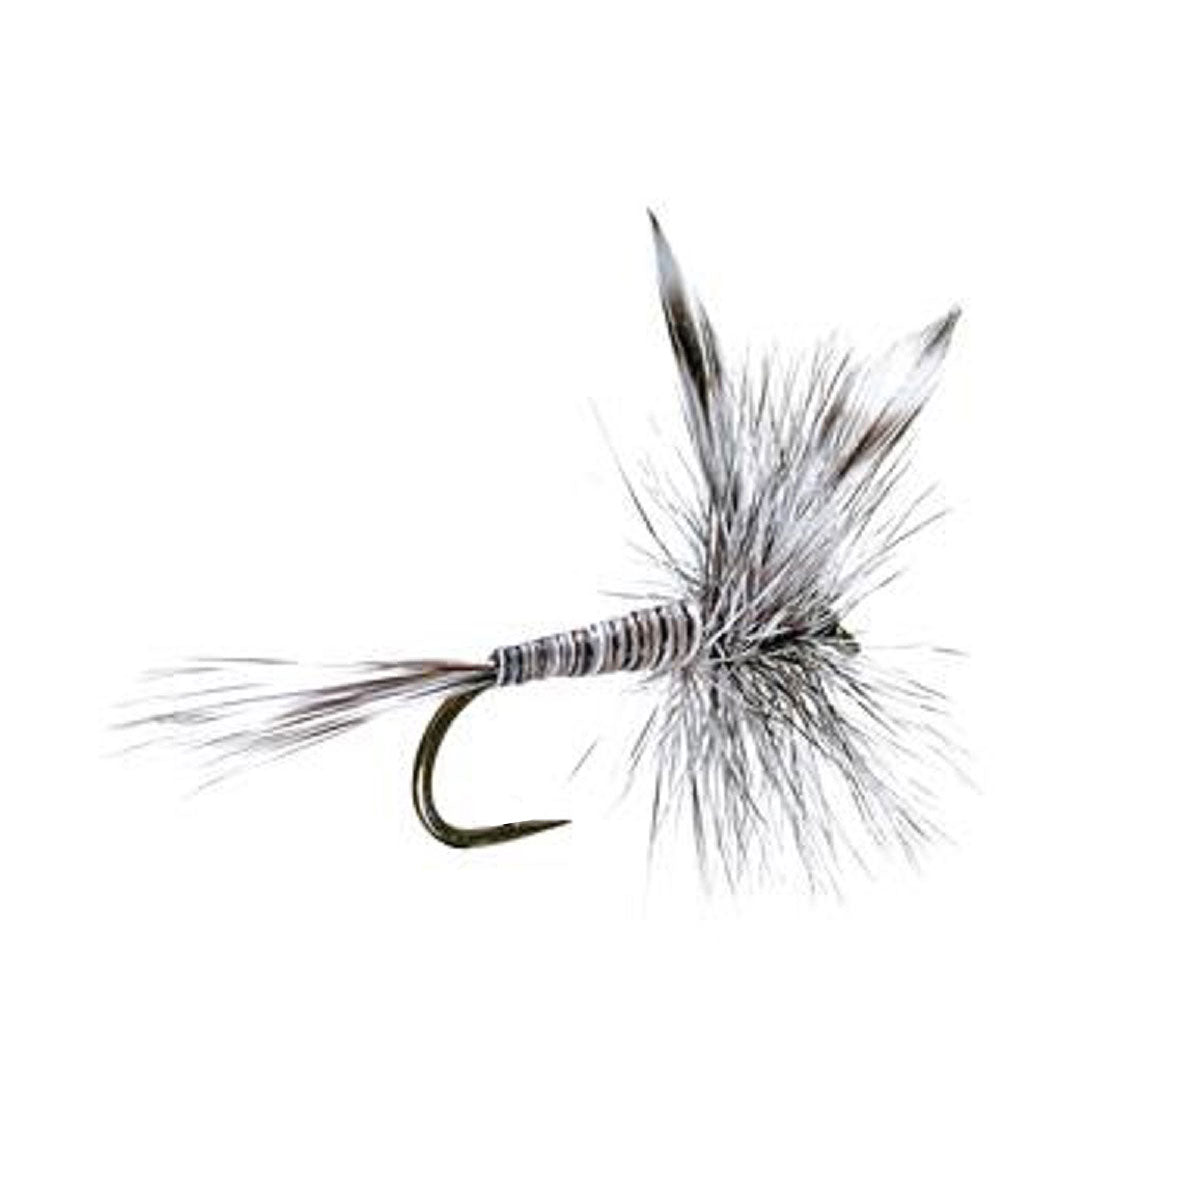 Barbless Mosquito Classic Trout Dry Fly Fishing 1 Dozen Flies - Hook Size 12